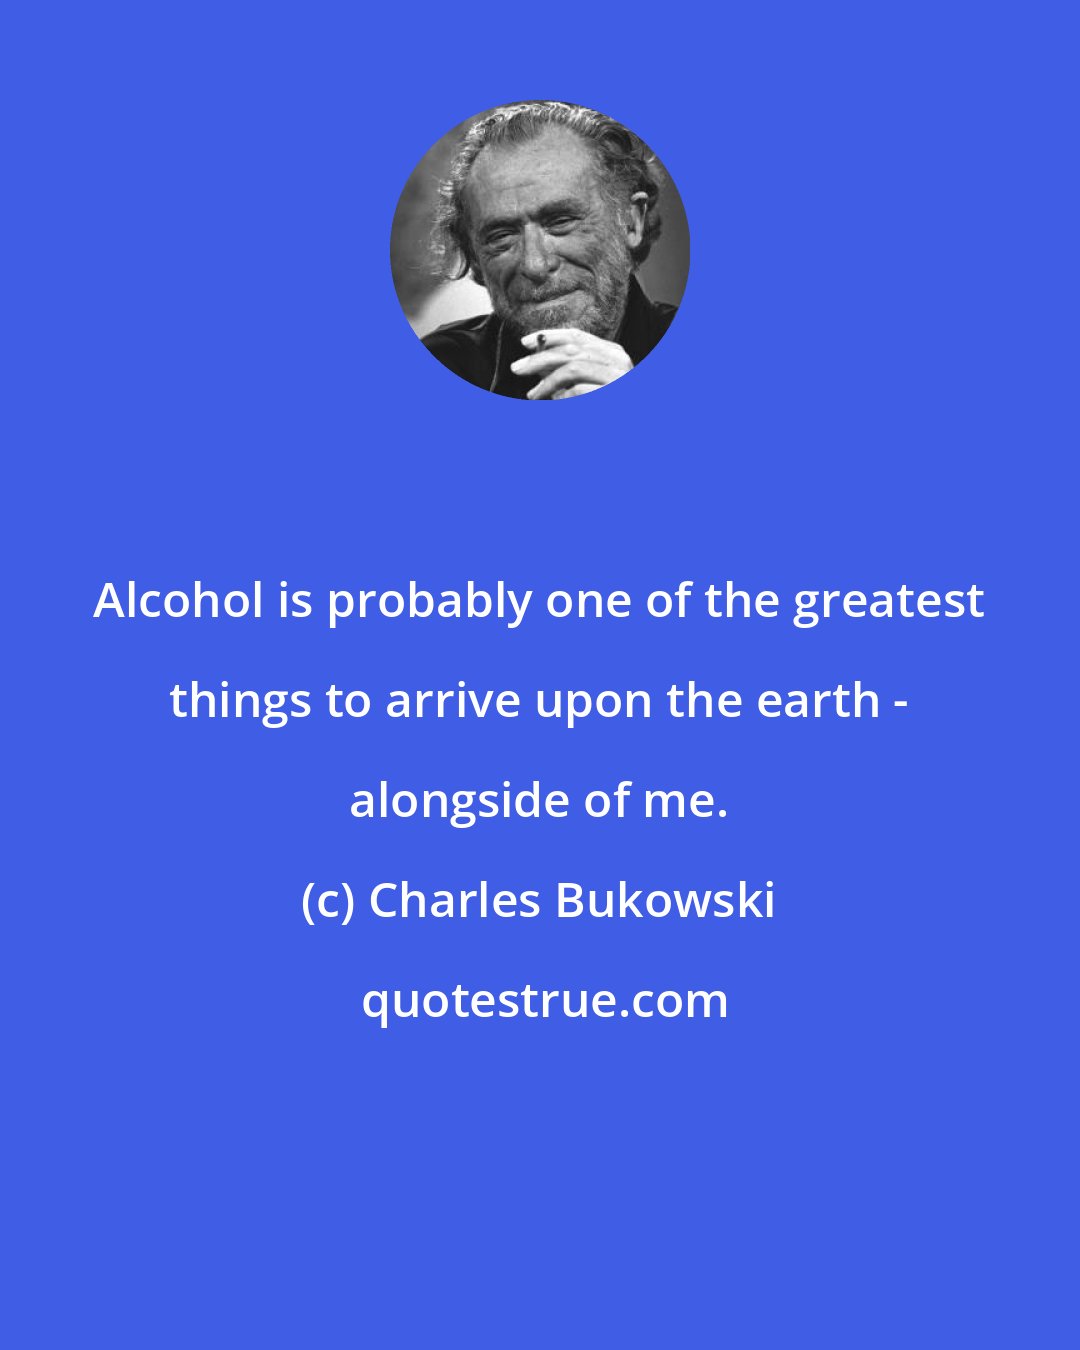 Charles Bukowski: Alcohol is probably one of the greatest things to arrive upon the earth - alongside of me.